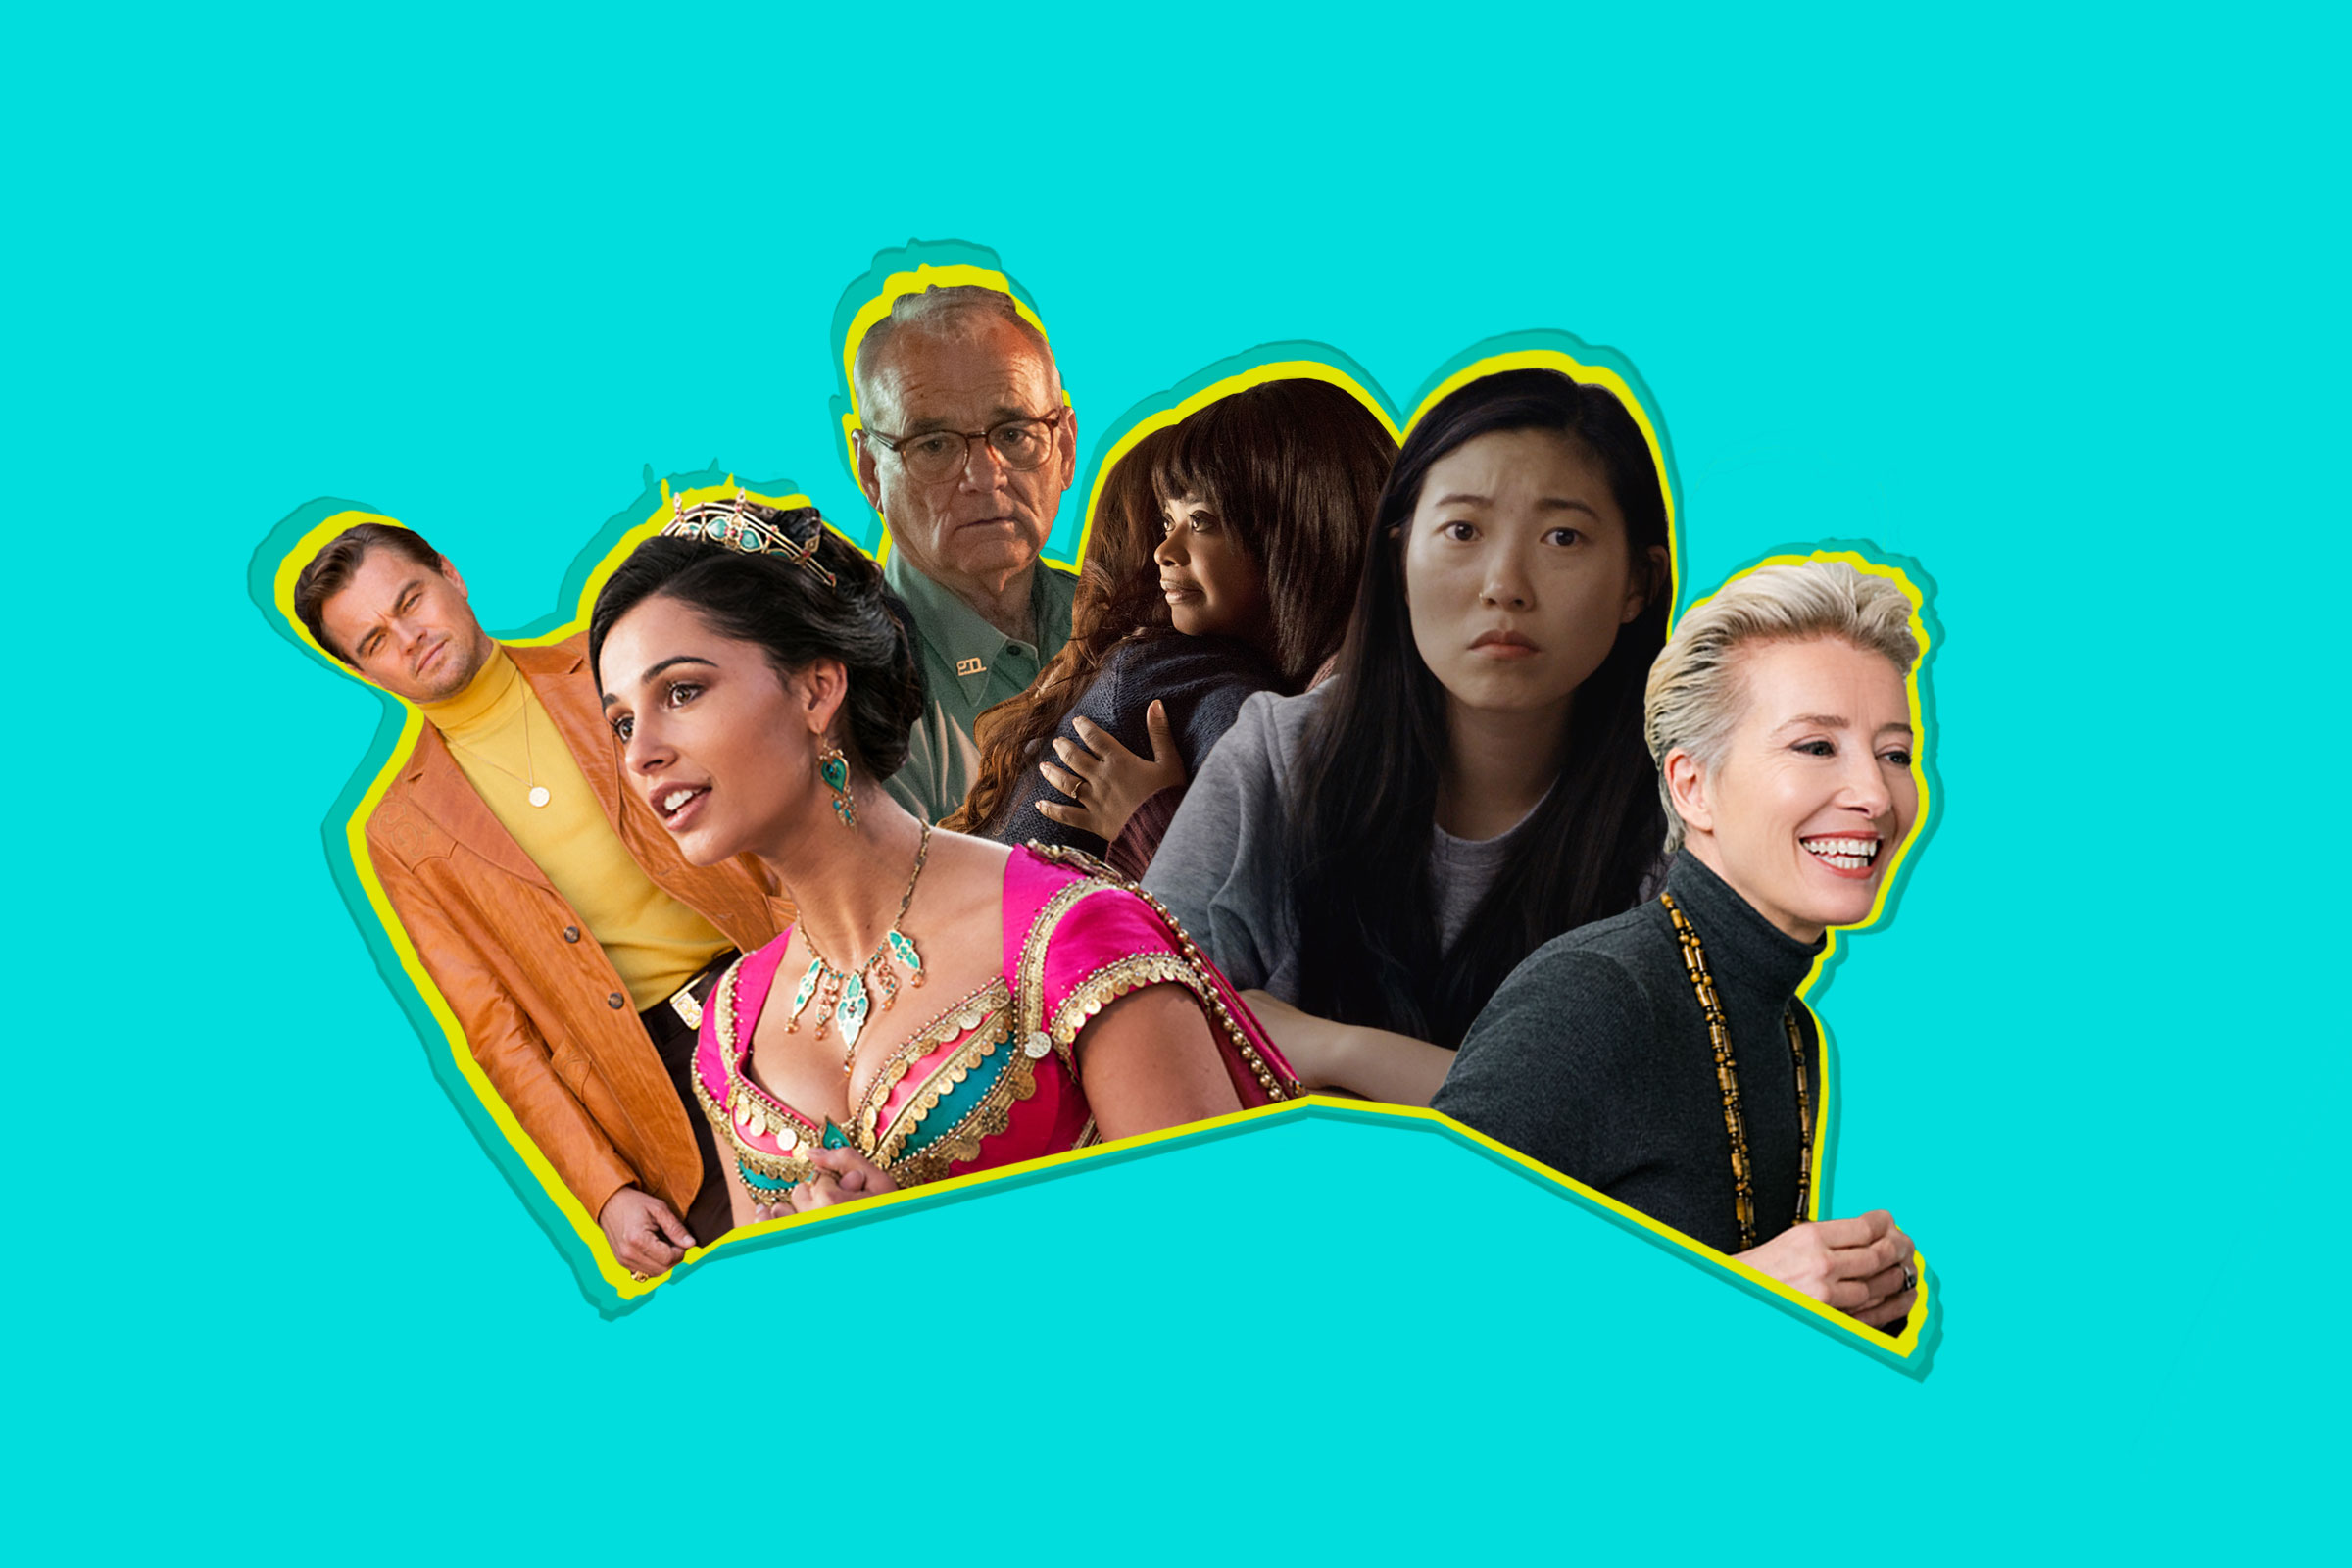 From left to right: Leonardo DiCaprio in <i>Once Upon a Time in Hollywood</i>; Naomi Scott in <i>Aladdin</i>; Bill Murray in <i>The Dead Don't Die</i>; Octavia Spencer in <i>Ma</i>; Awkwafina in <i>The Farewell</i>; Emma Thompson in <i>Late Night</i>. (Sony Pictures; Disney; Focus Features; Universal Studios; A24; Amazon Studios)